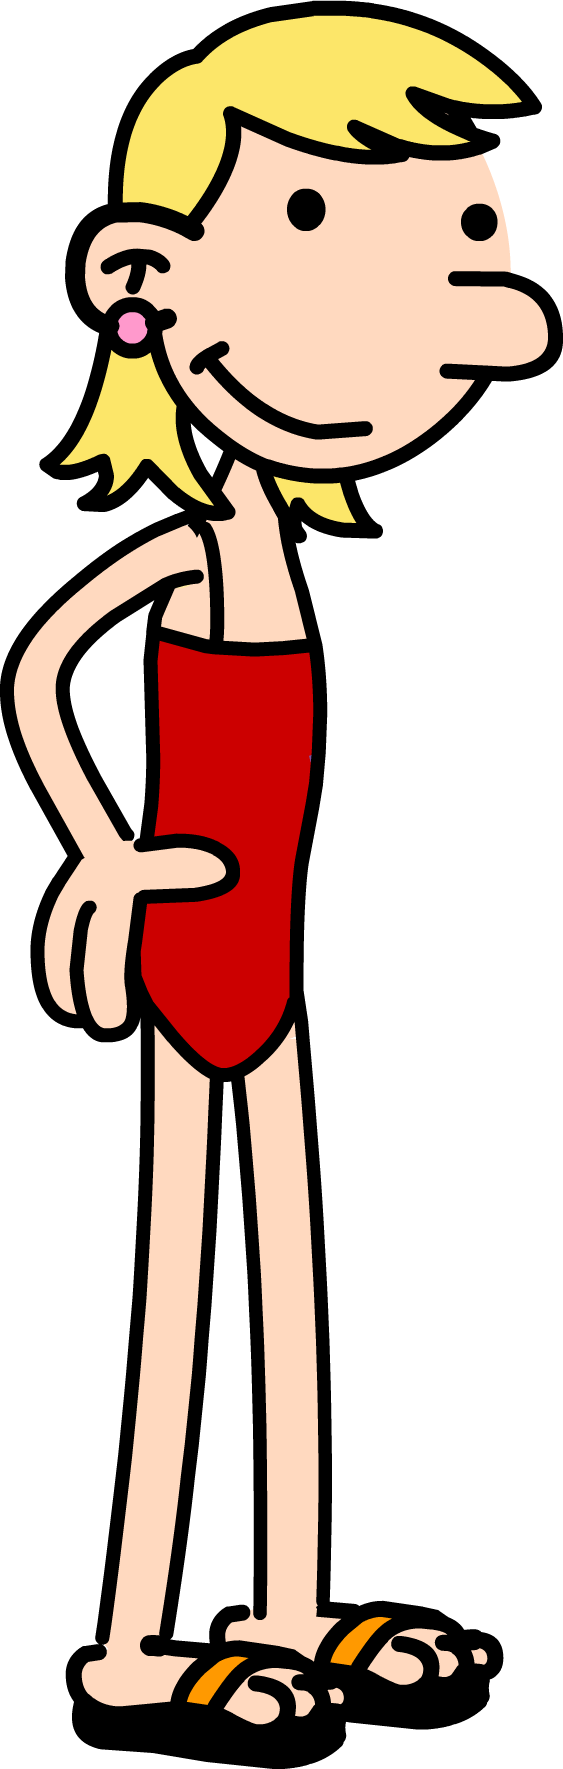 Cartoon Character In A Swimsuit